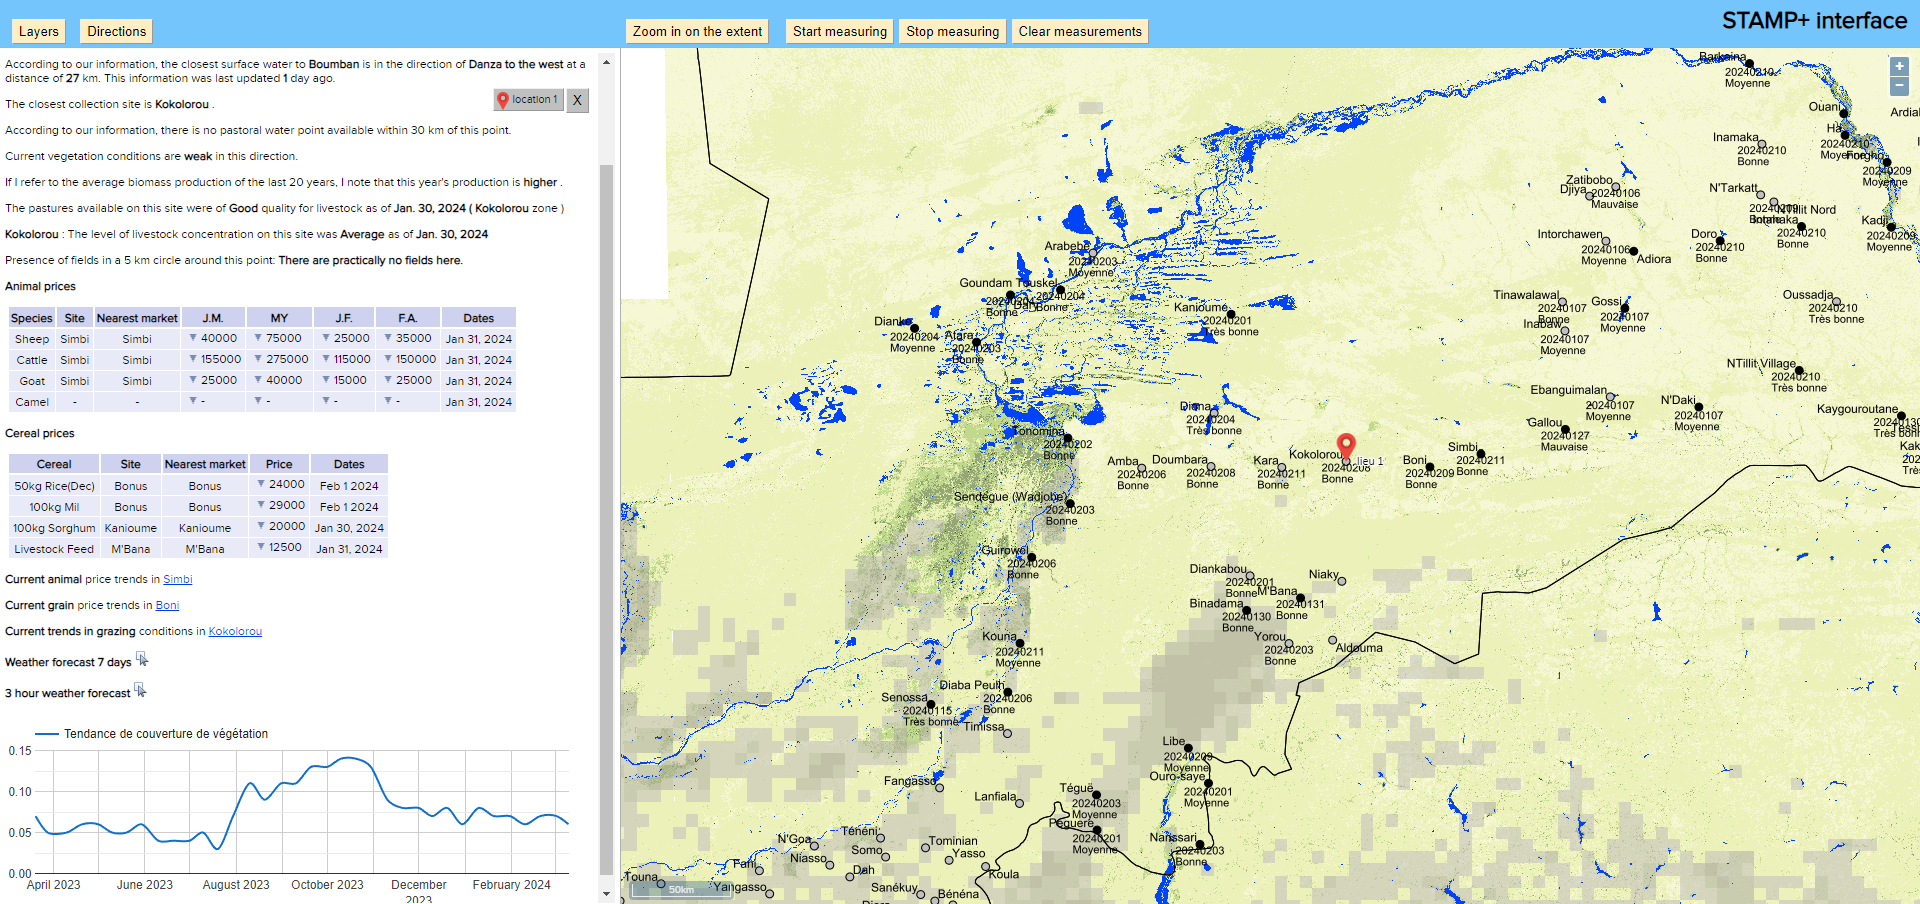 screenshot of the STAMP+ Interface showing a map of the area around Kokolorou. An info panel on the left shows other data about the area including a chart of current animal and cereal prices, vegetation levels and button for a 7 day weather forecast